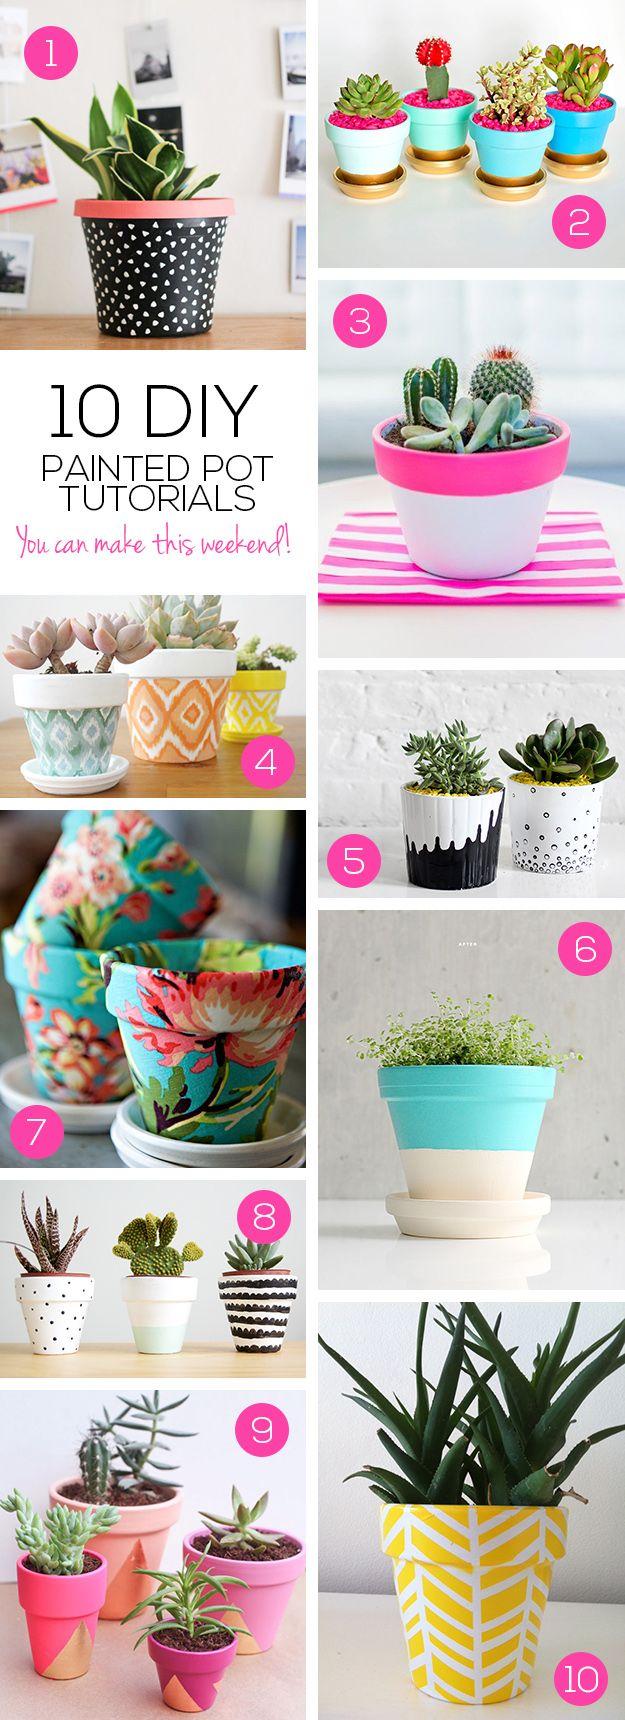 Wedding - 10 DIY Pretty Plant Pots You Can Create This Weekend